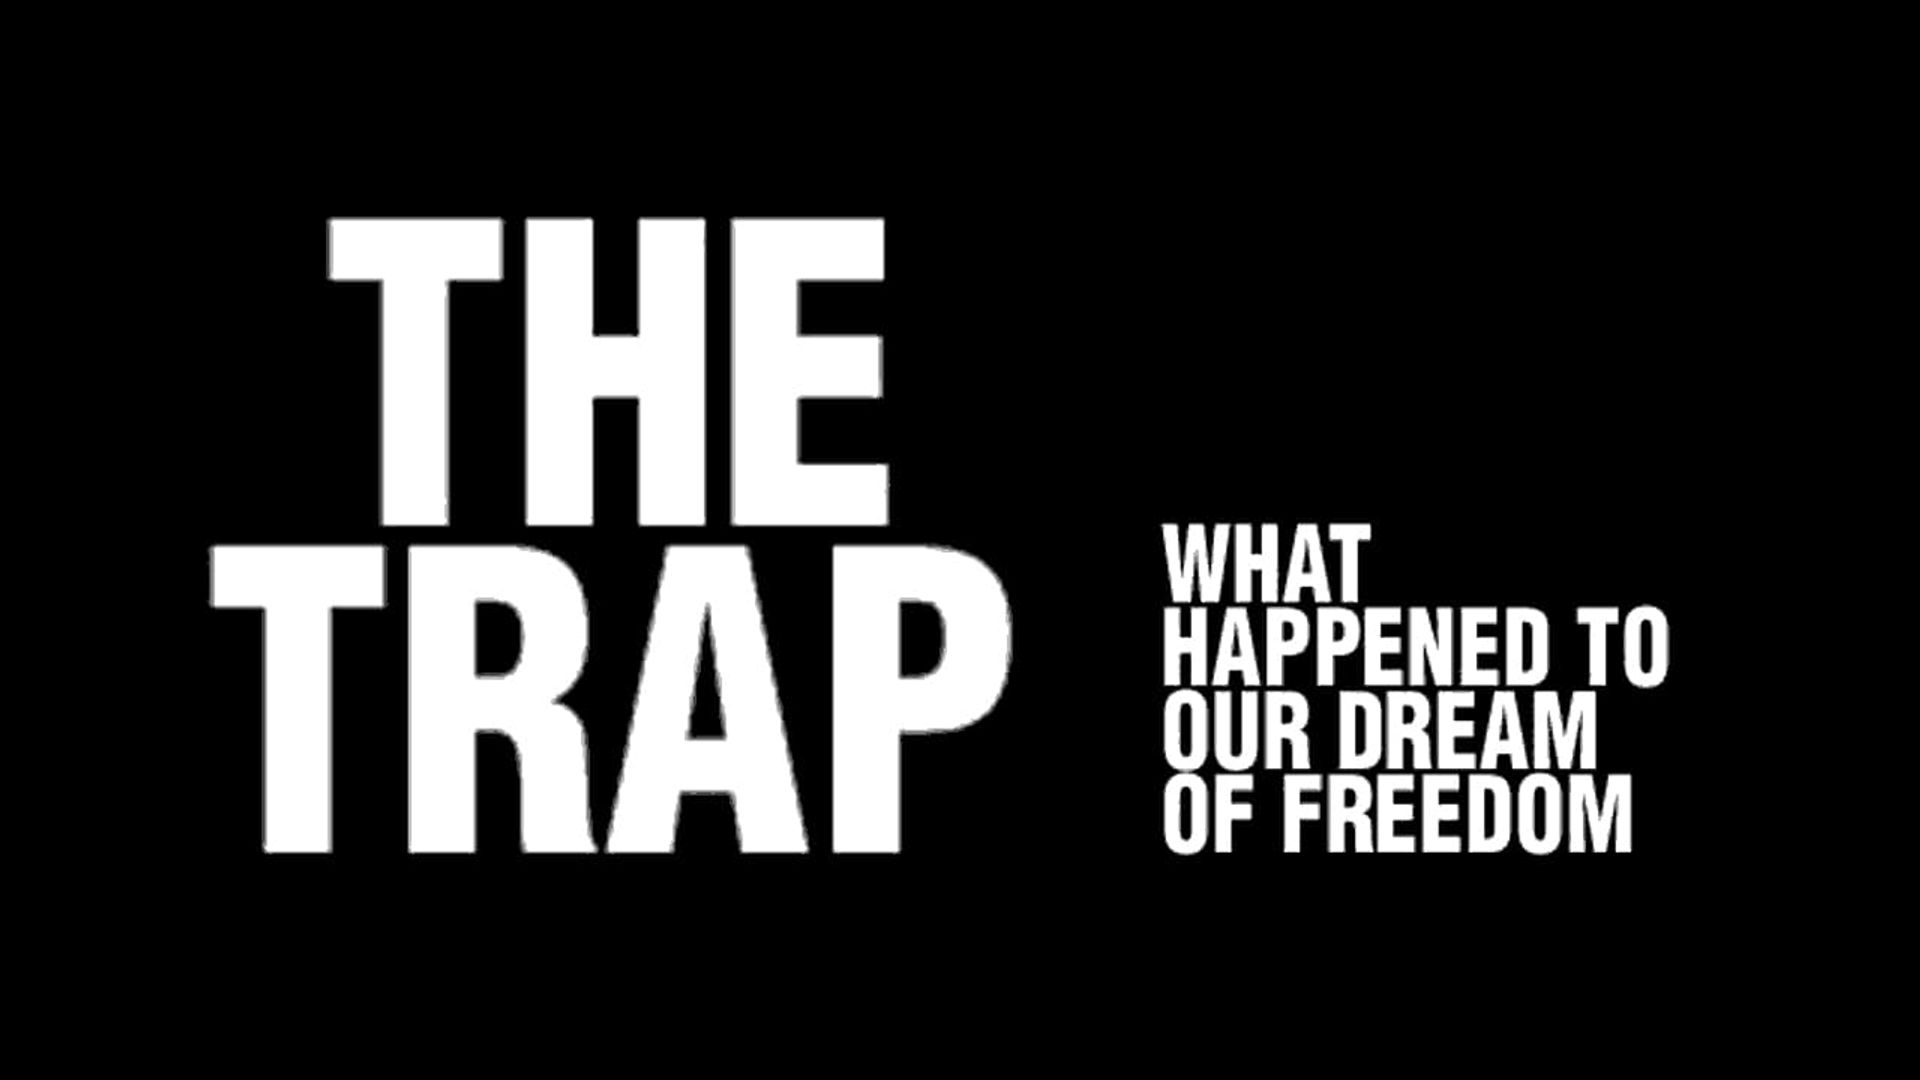 The Trap: What Happened to Our Dream of Freedom background